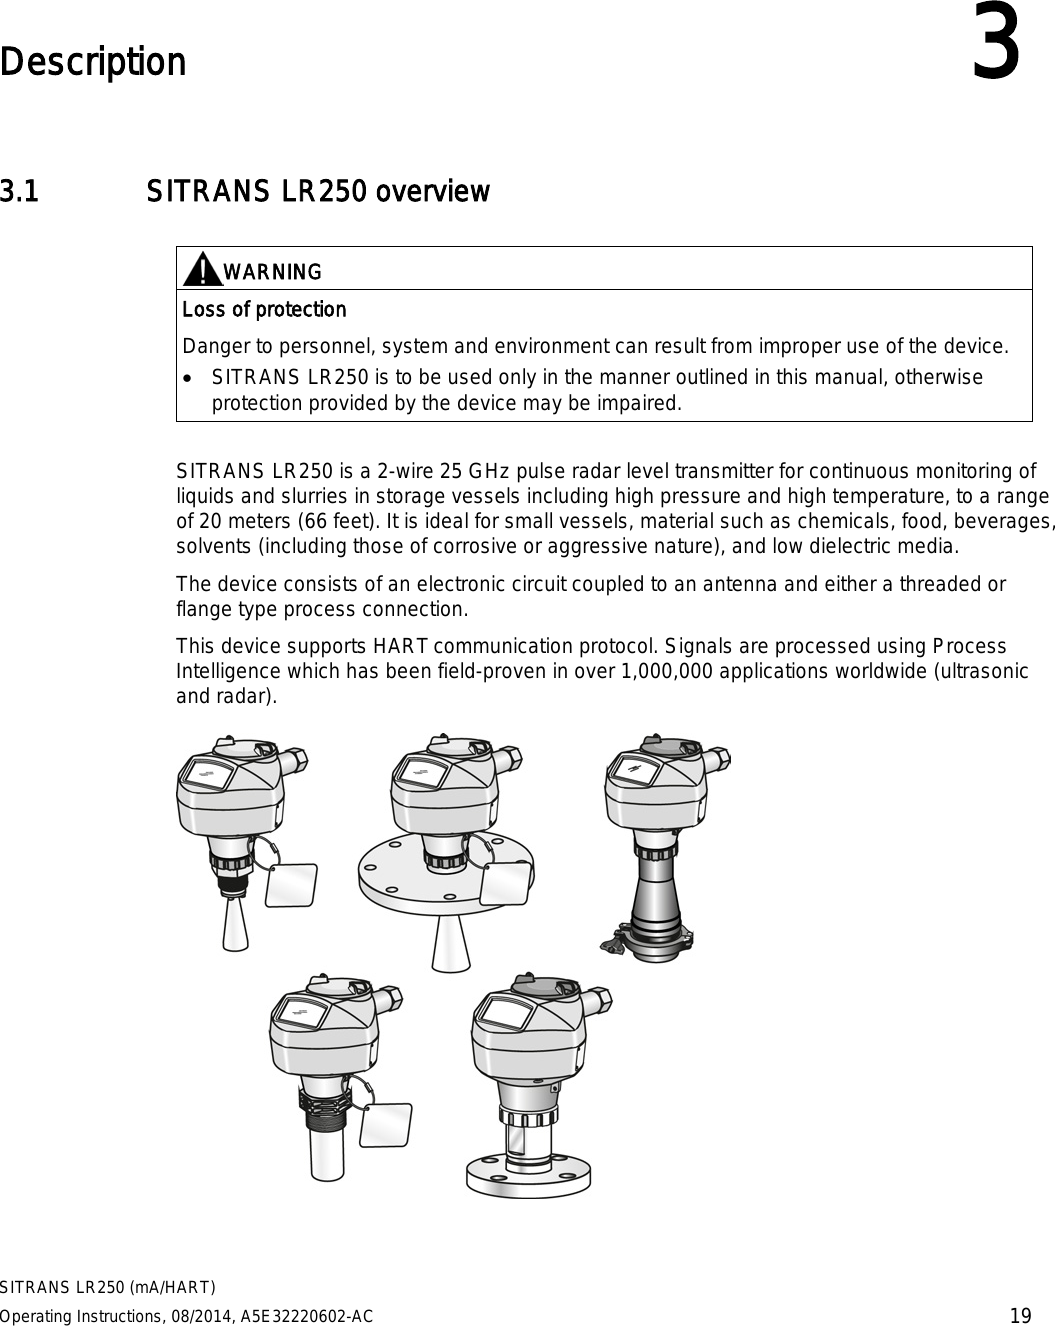  SITRANS LR250 (mA/HART) Operating Instructions, 08/2014, A5E32220602-AC 19  Description 3 3.1 SITRANS LR250 overview   WARNING Loss of protection Danger to personnel, system and environment can result from improper use of the device. • SITRANS LR250 is to be used only in the manner outlined in this manual, otherwise protection provided by the device may be impaired.  SITRANS LR250 is a 2-wire 25 GHz pulse radar level transmitter for continuous monitoring of liquids and slurries in storage vessels including high pressure and high temperature, to a range of 20 meters (66 feet). It is ideal for small vessels, material such as chemicals, food, beverages, solvents (including those of corrosive or aggressive nature), and low dielectric media.  The device consists of an electronic circuit coupled to an antenna and either a threaded or flange type process connection. This device supports HART communication protocol. Signals are processed using Process Intelligence which has been field-proven in over 1,000,000 applications worldwide (ultrasonic and radar).   